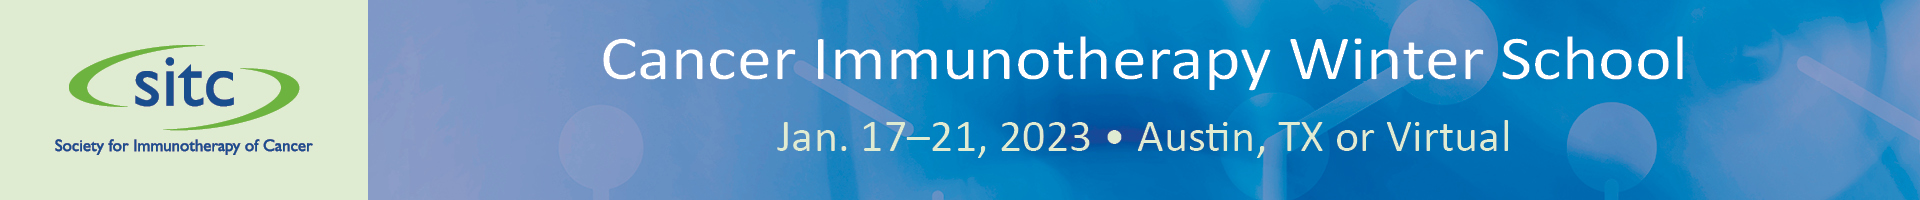 2023 Cancer Immunotherapy Winter School Travel Awards Event Banner